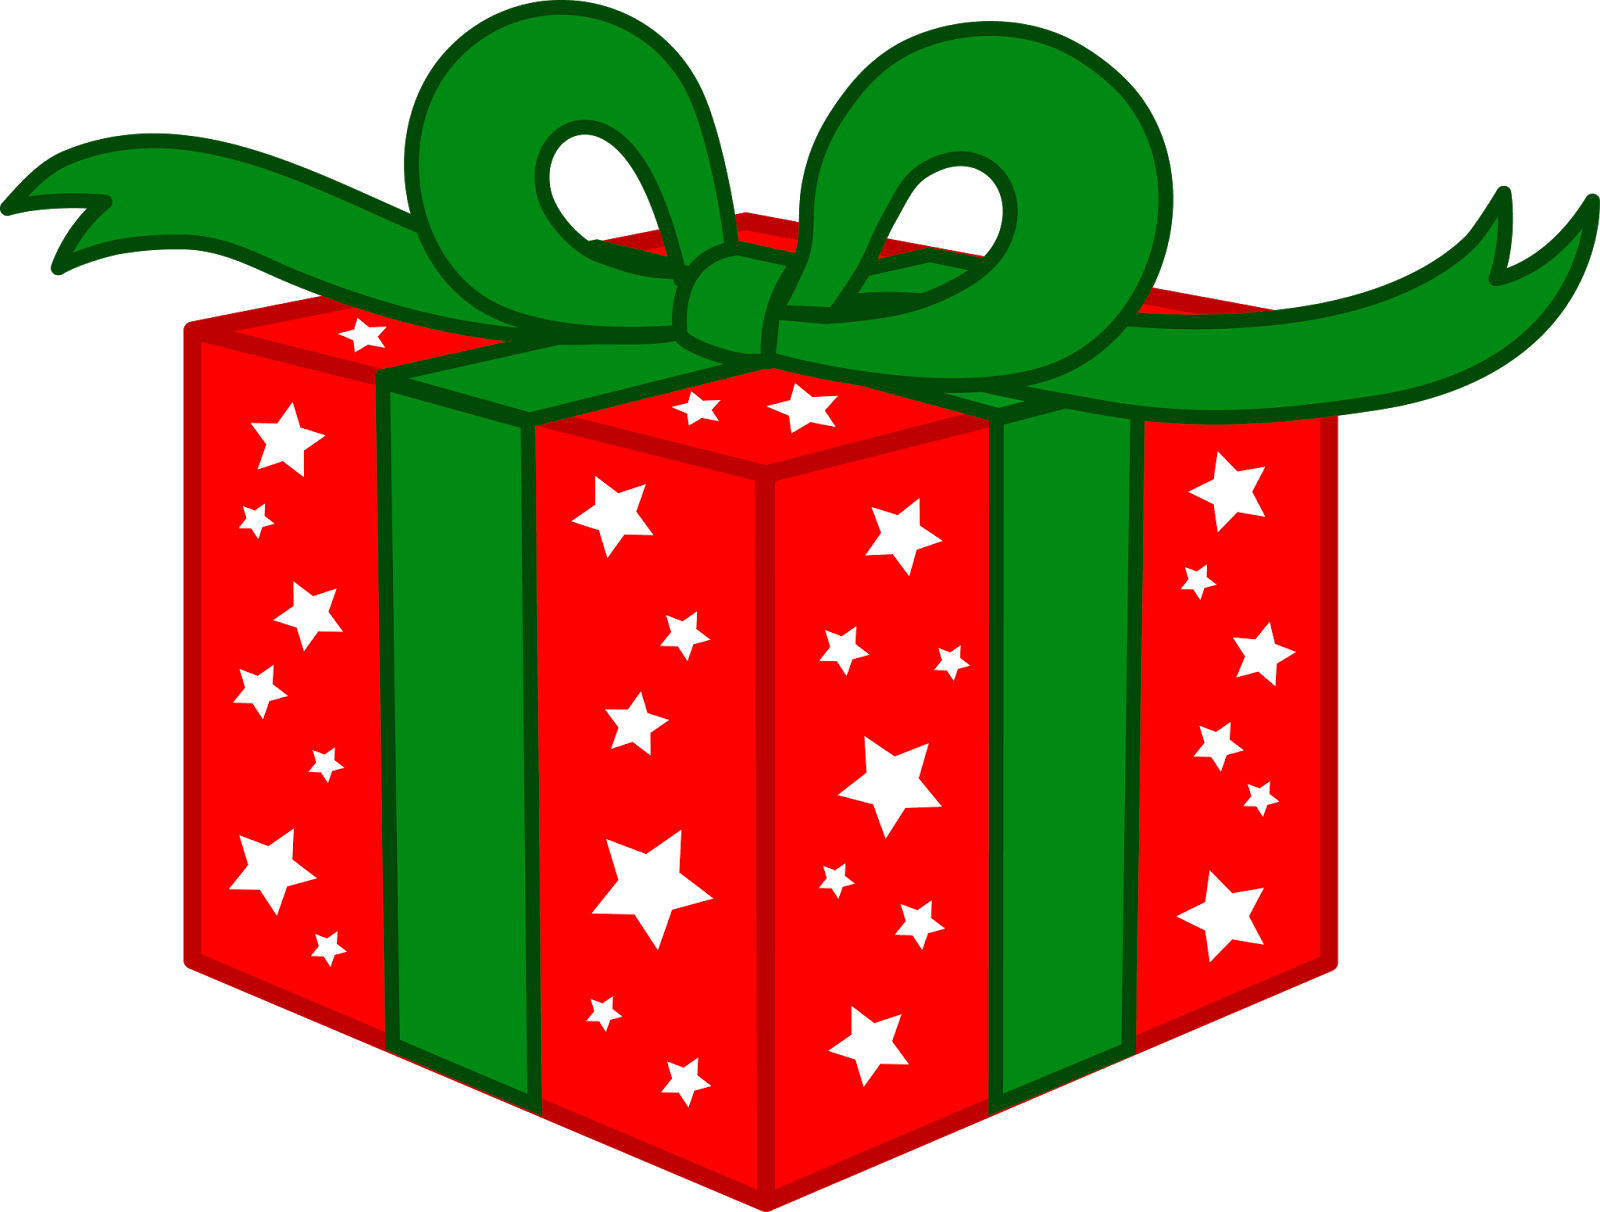 gift clipart transparent background